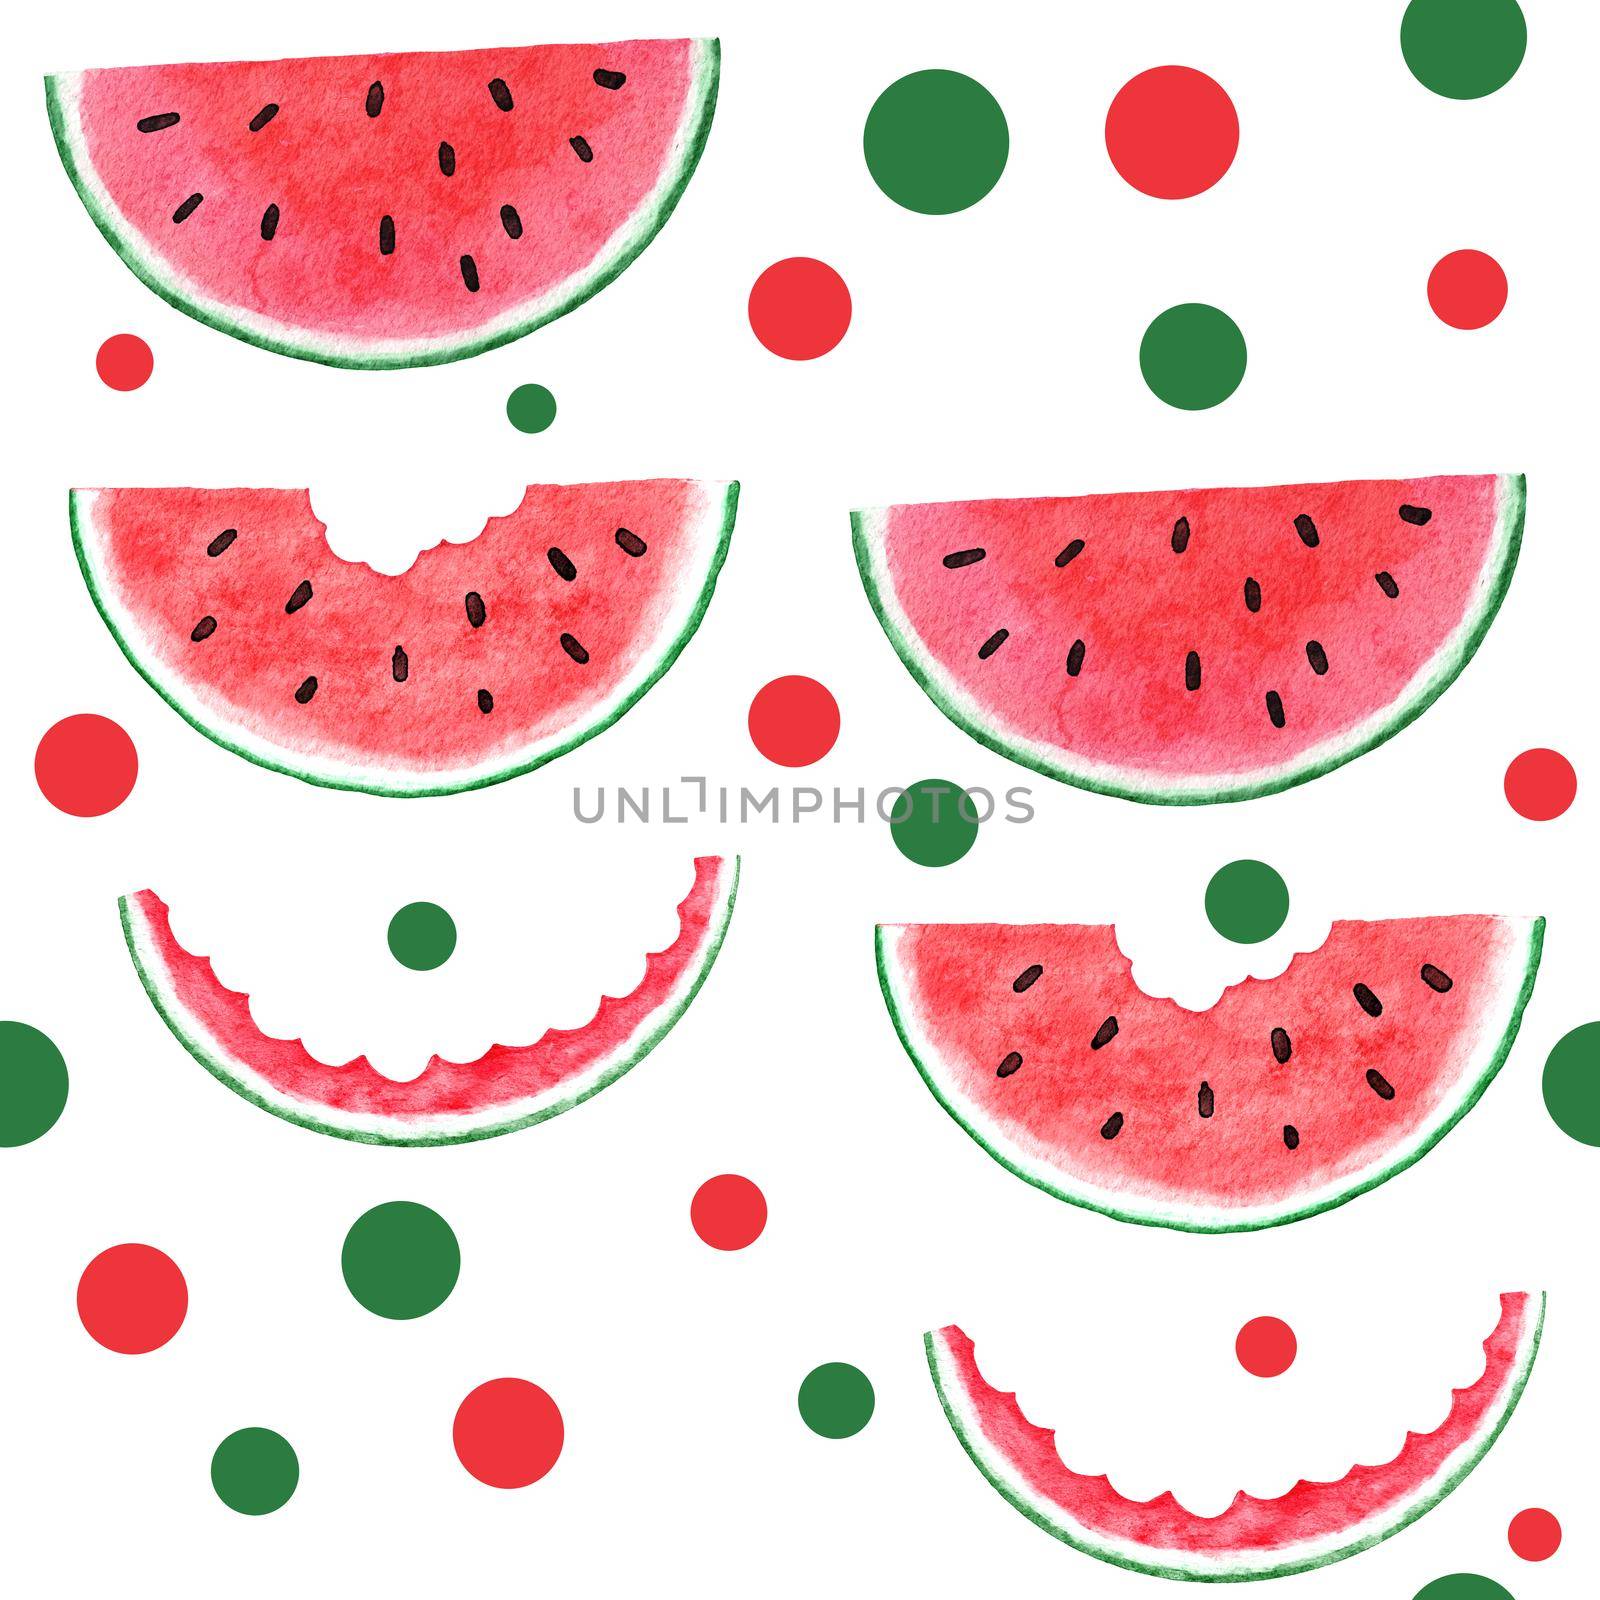 Watercolor hand drawn seamless pattern with watermelon fruit, red green tropical food, bright summer holiday background. Juicy frech natural plant design with geometric elements. by Lagmar